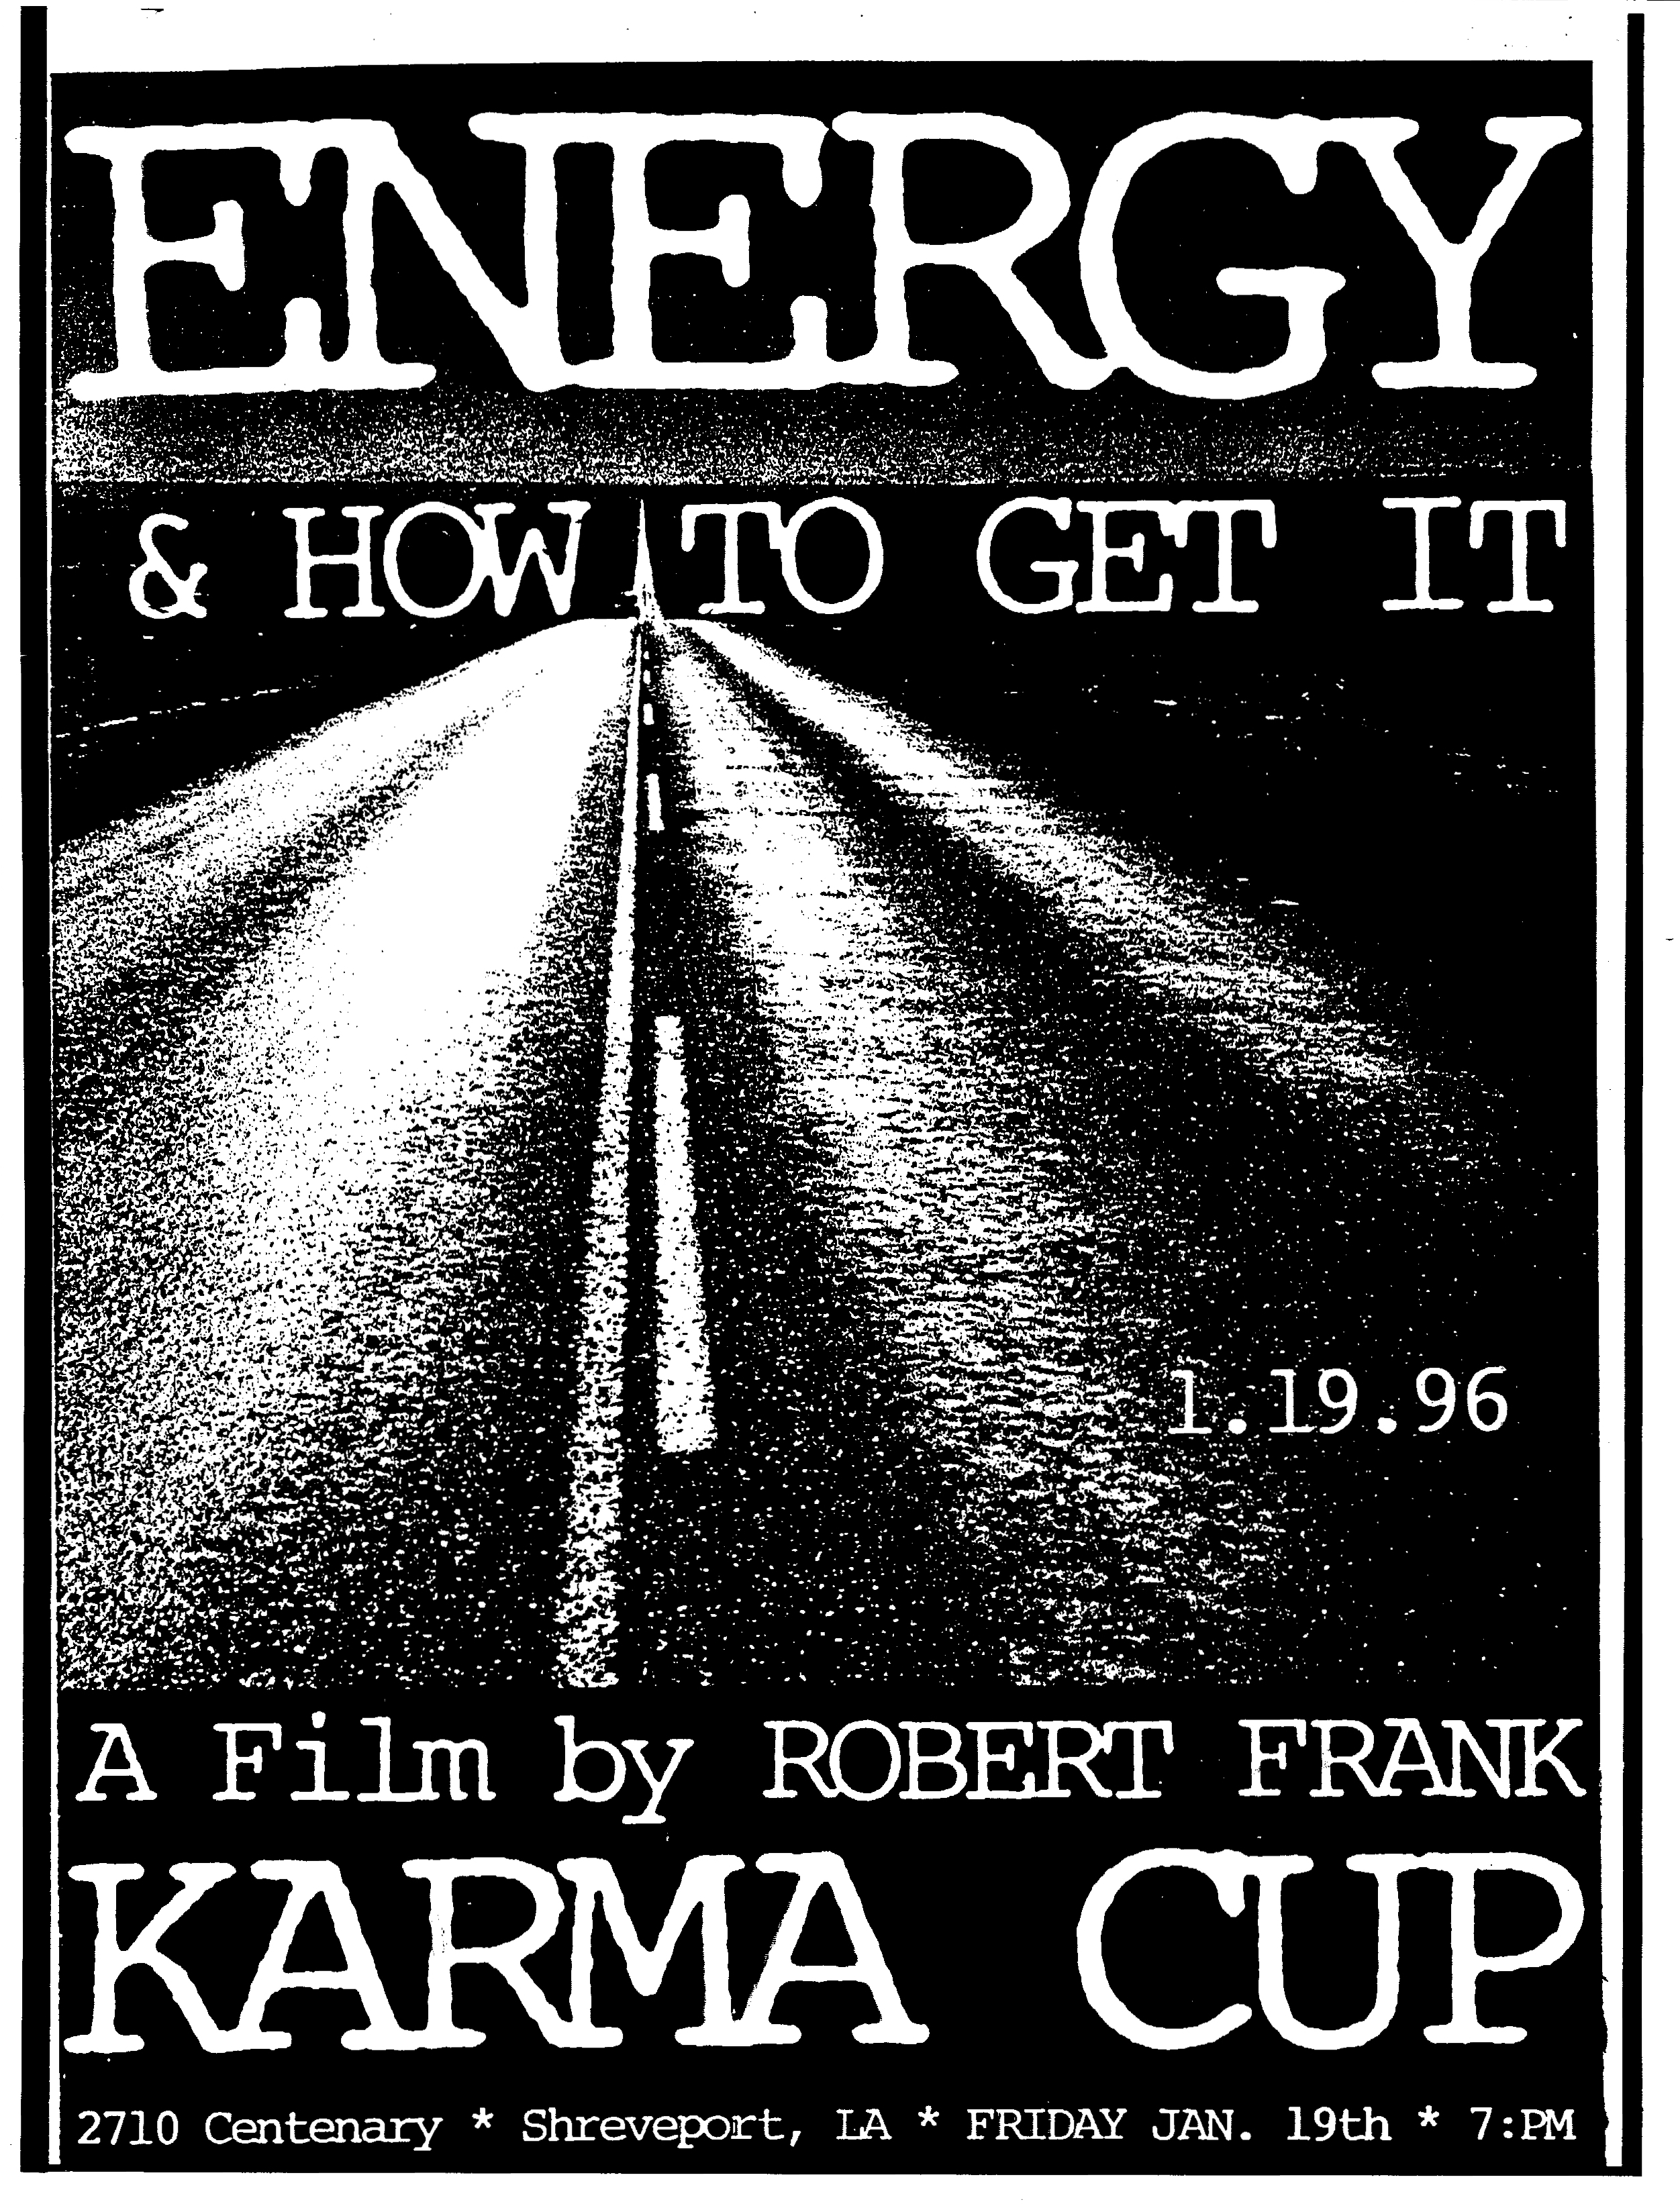 Energy & How to Get It by Robert Frank